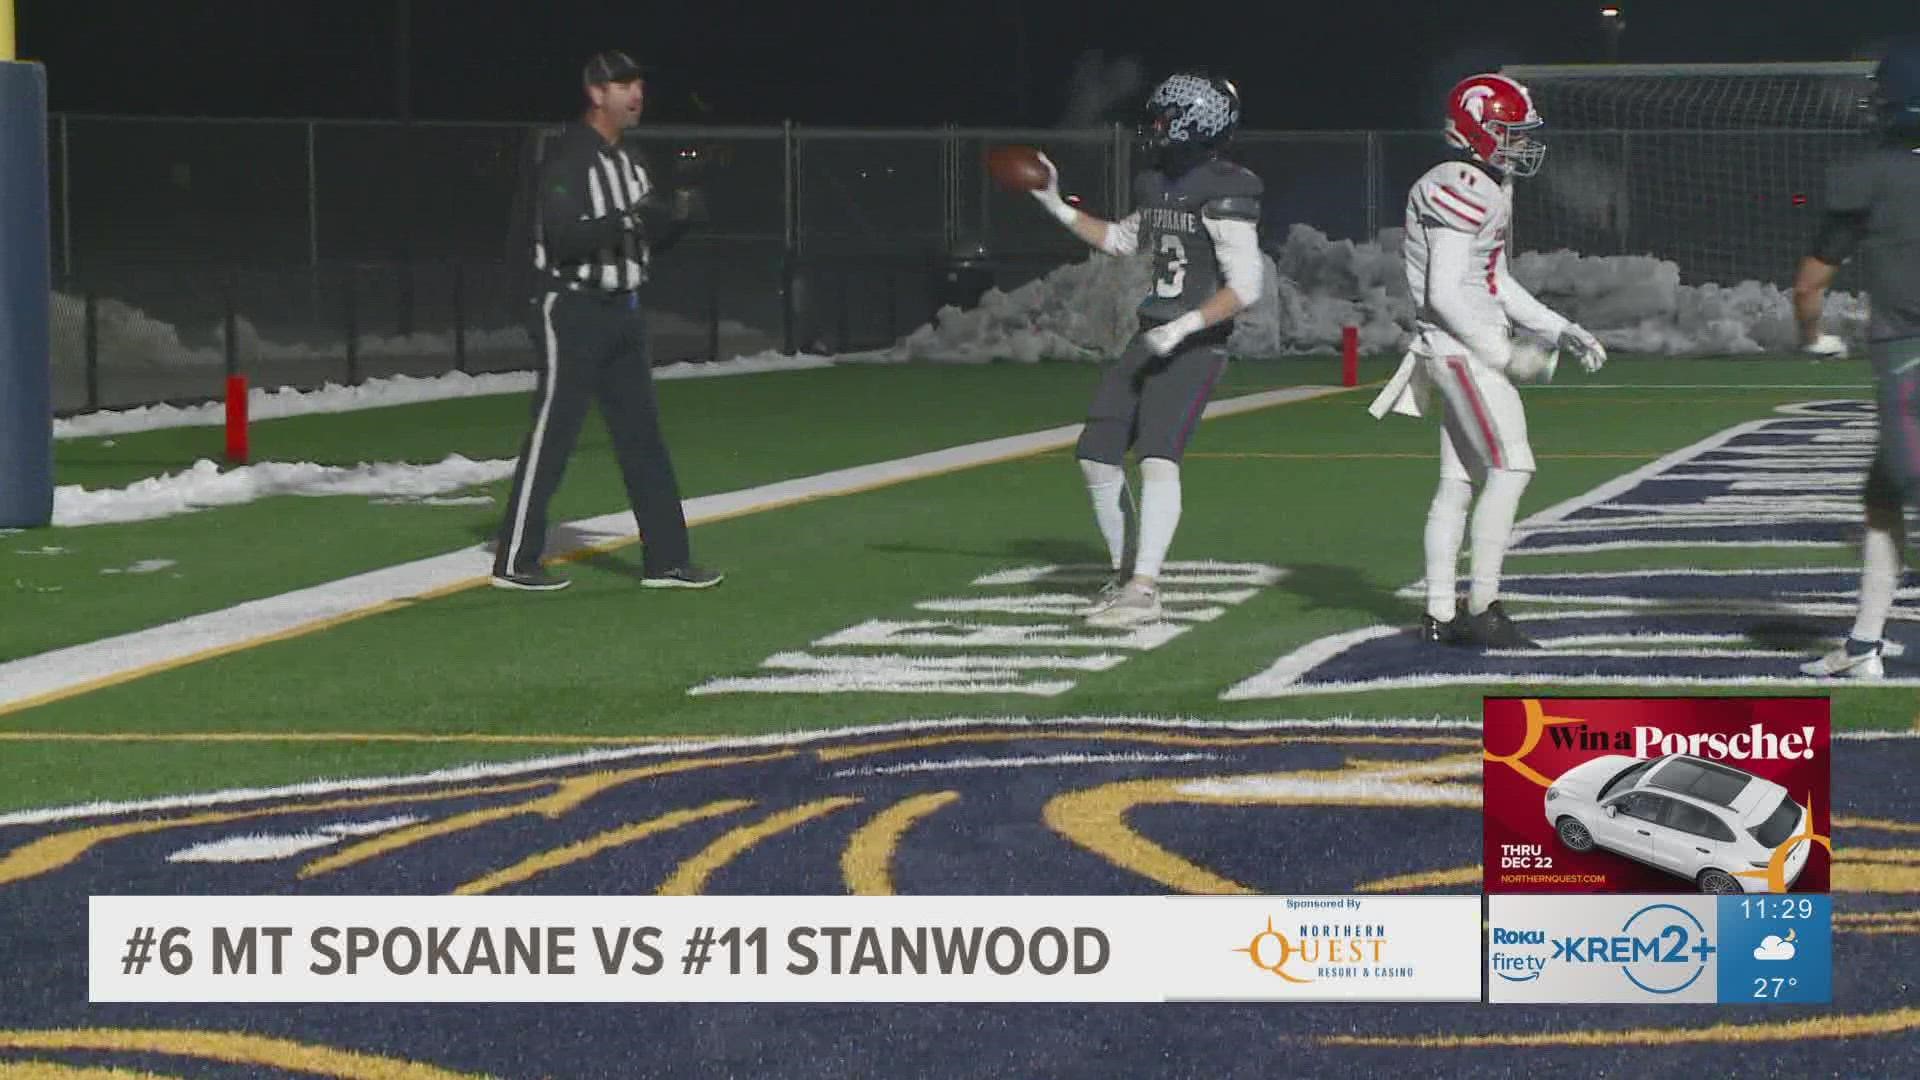 Highlights from a pair of Friday night playoff games